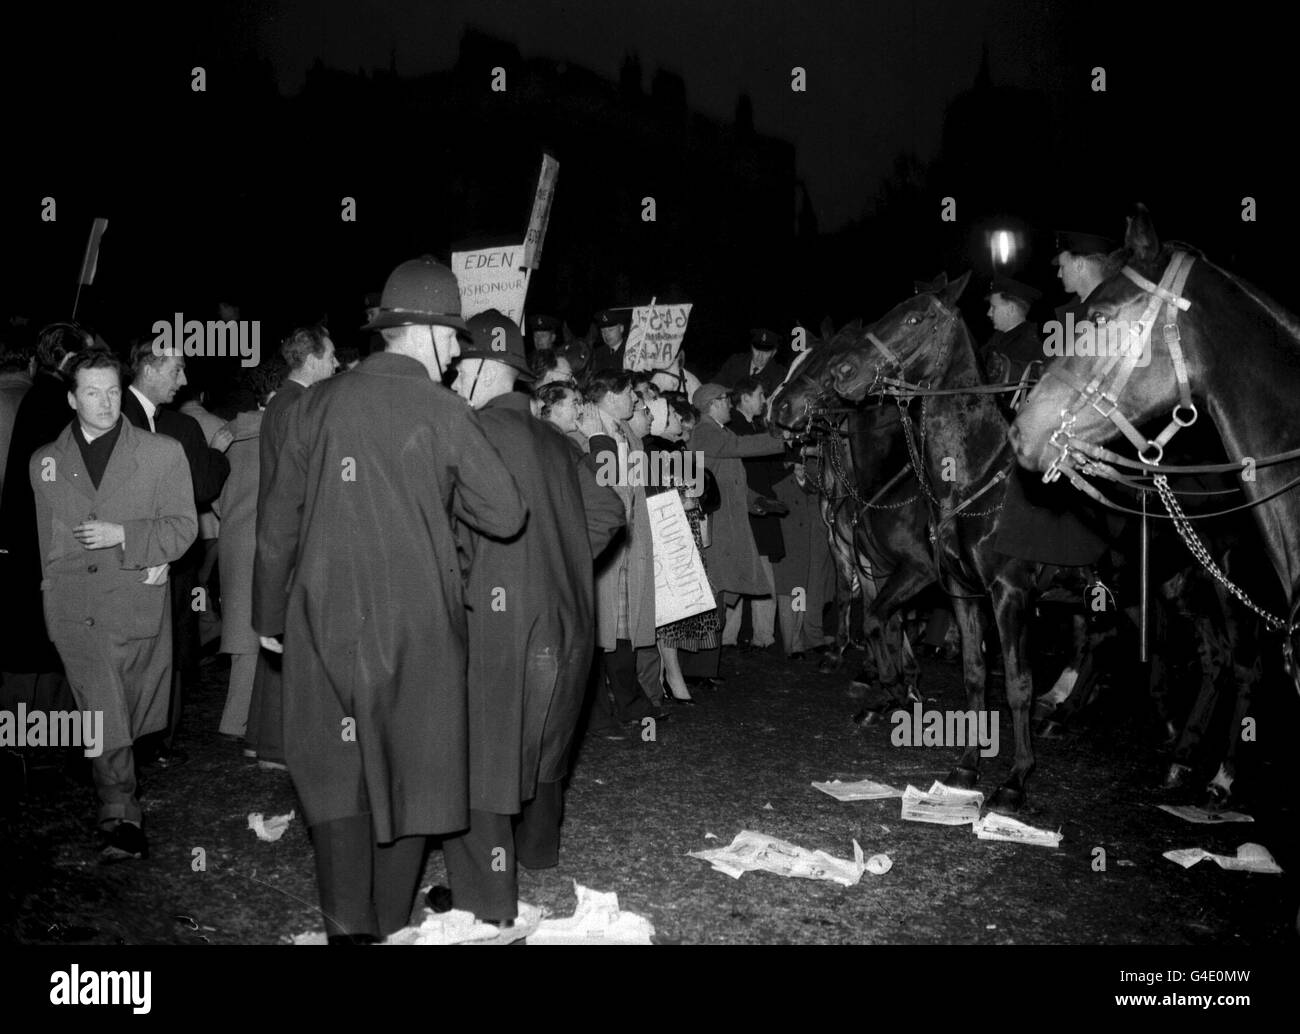 PA NEWS PHOTO 4/11/56 ANTI-WAR DEMONSTRATORS AT WHITEHALL, LONDON FOR THE NATIONAL COUNCIL OF LABOUR'S PROTEST RALLY AGAINST THE GOVERNMENT'S HANDLING OF THE SUEZ SITUATION Stock Photo